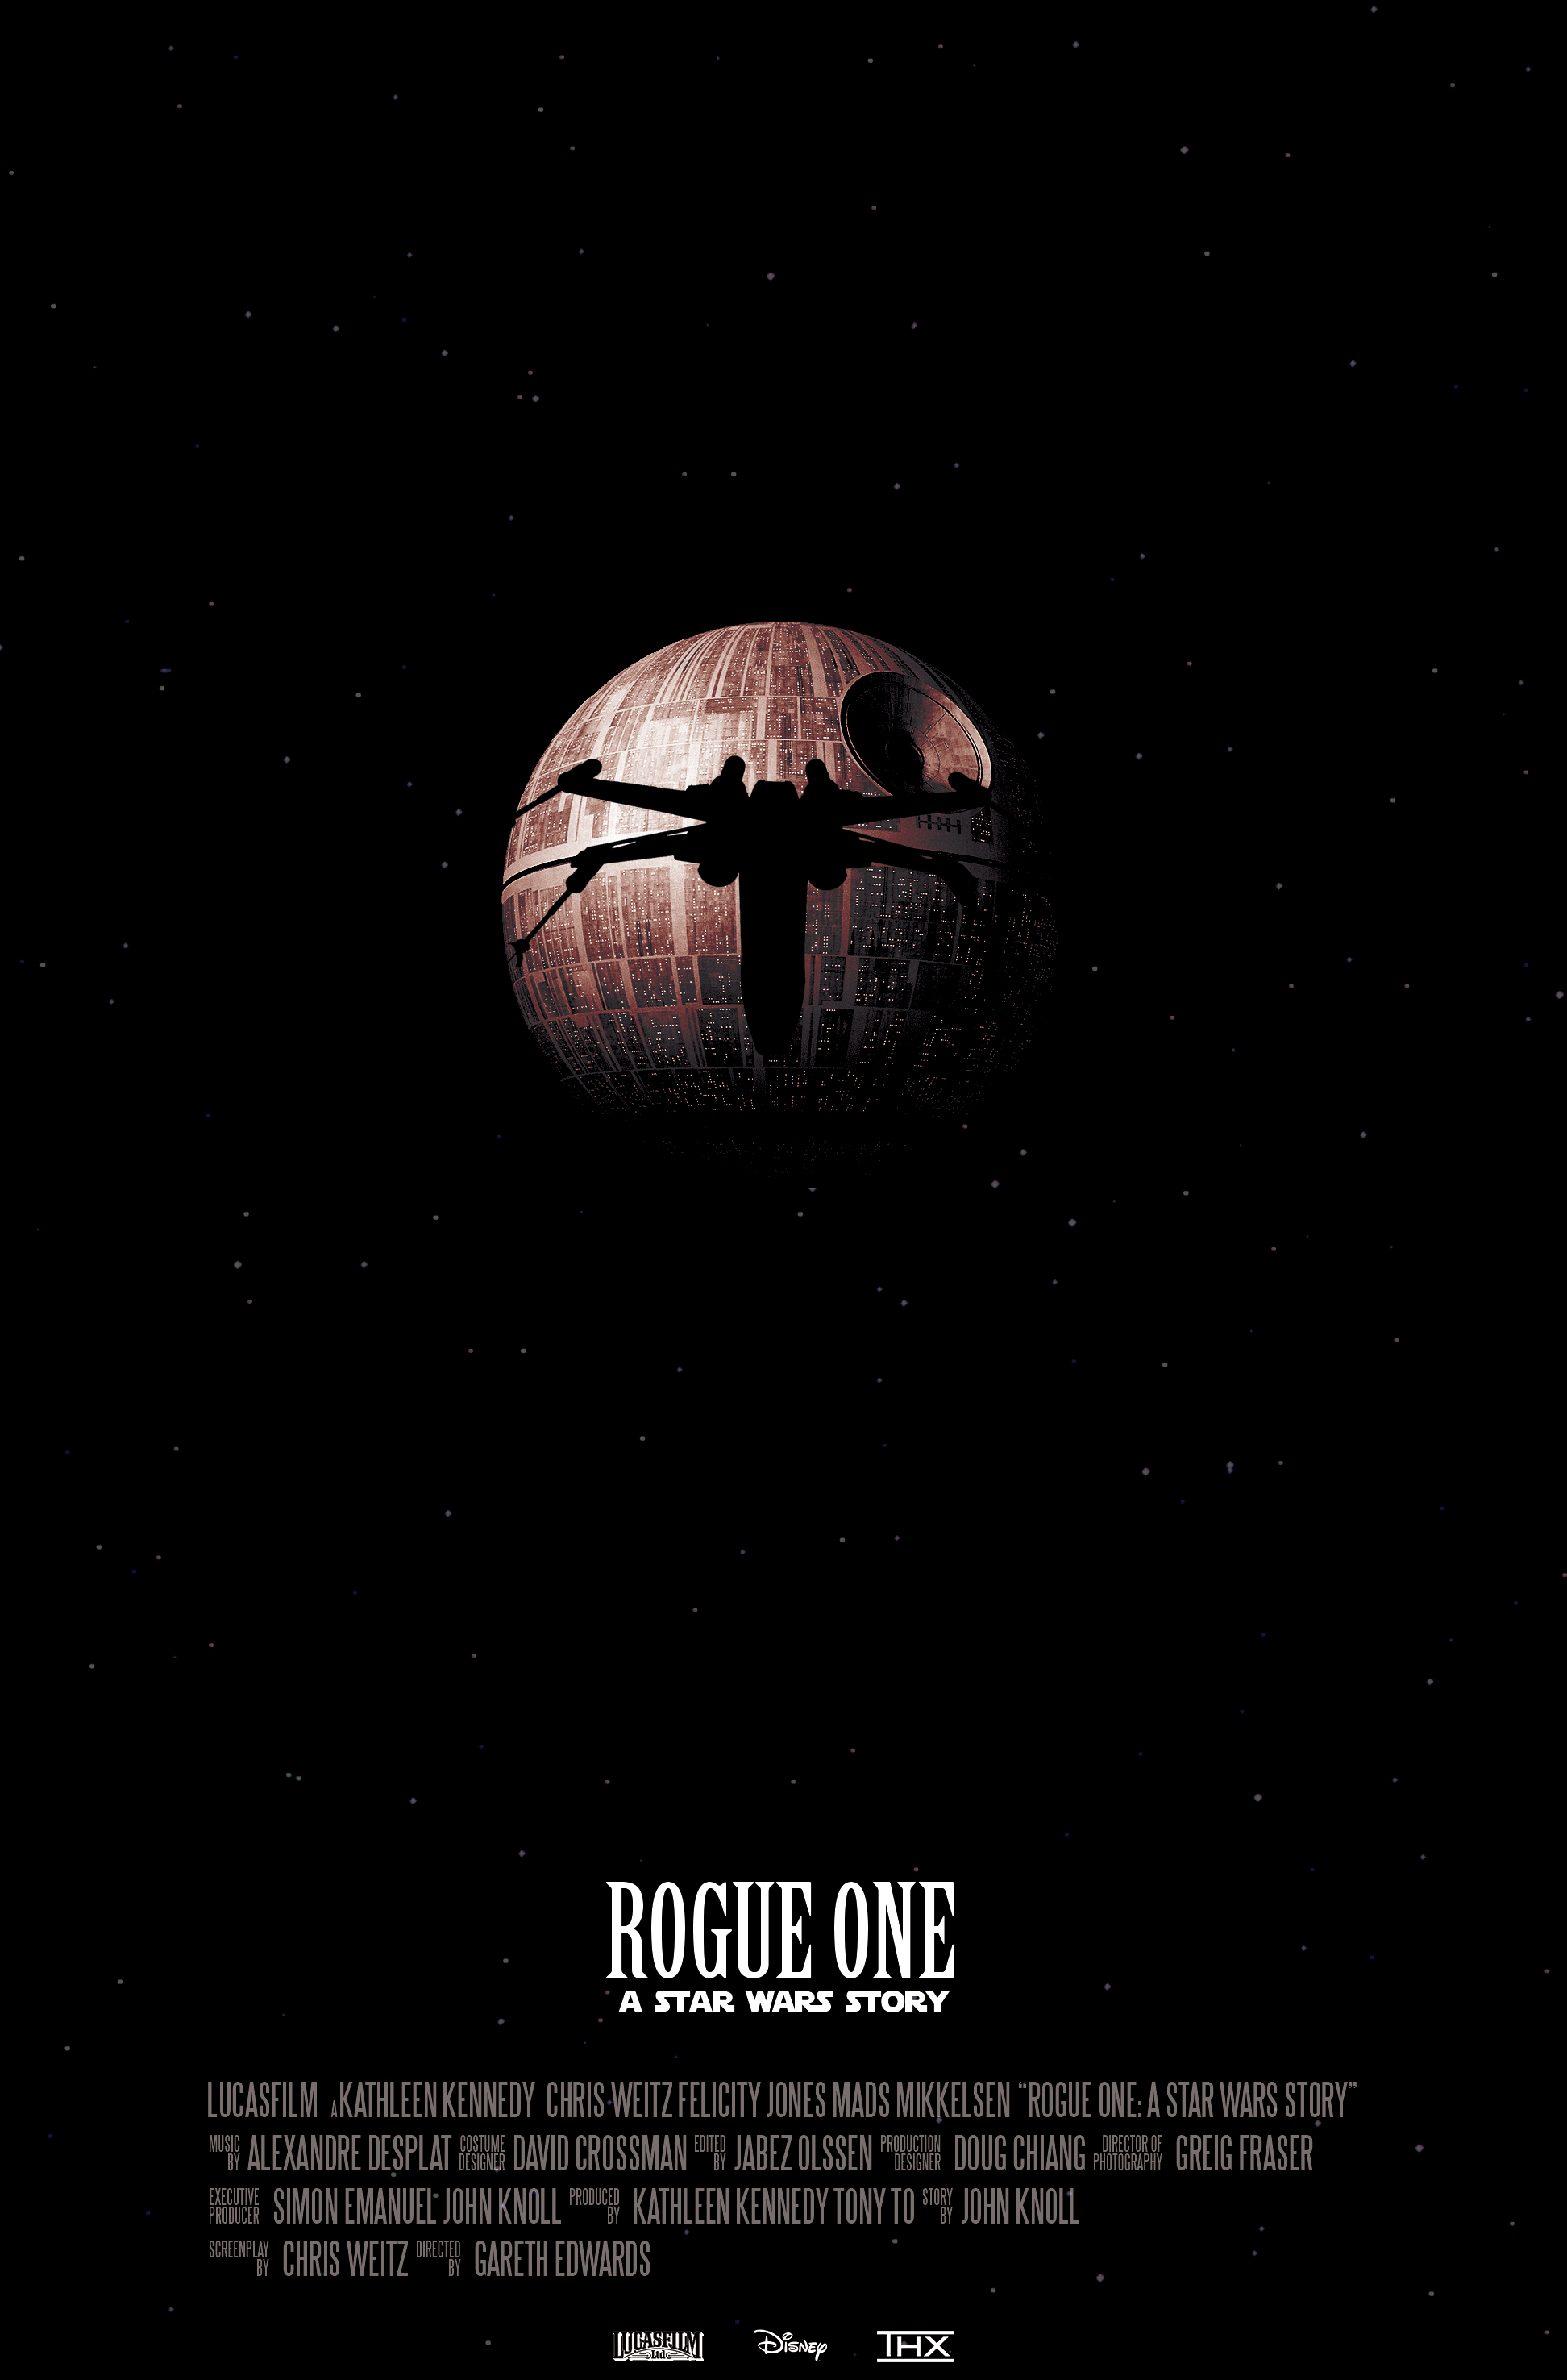 Film Rogue One: A Star Wars Story Watch Online Bluray 2016